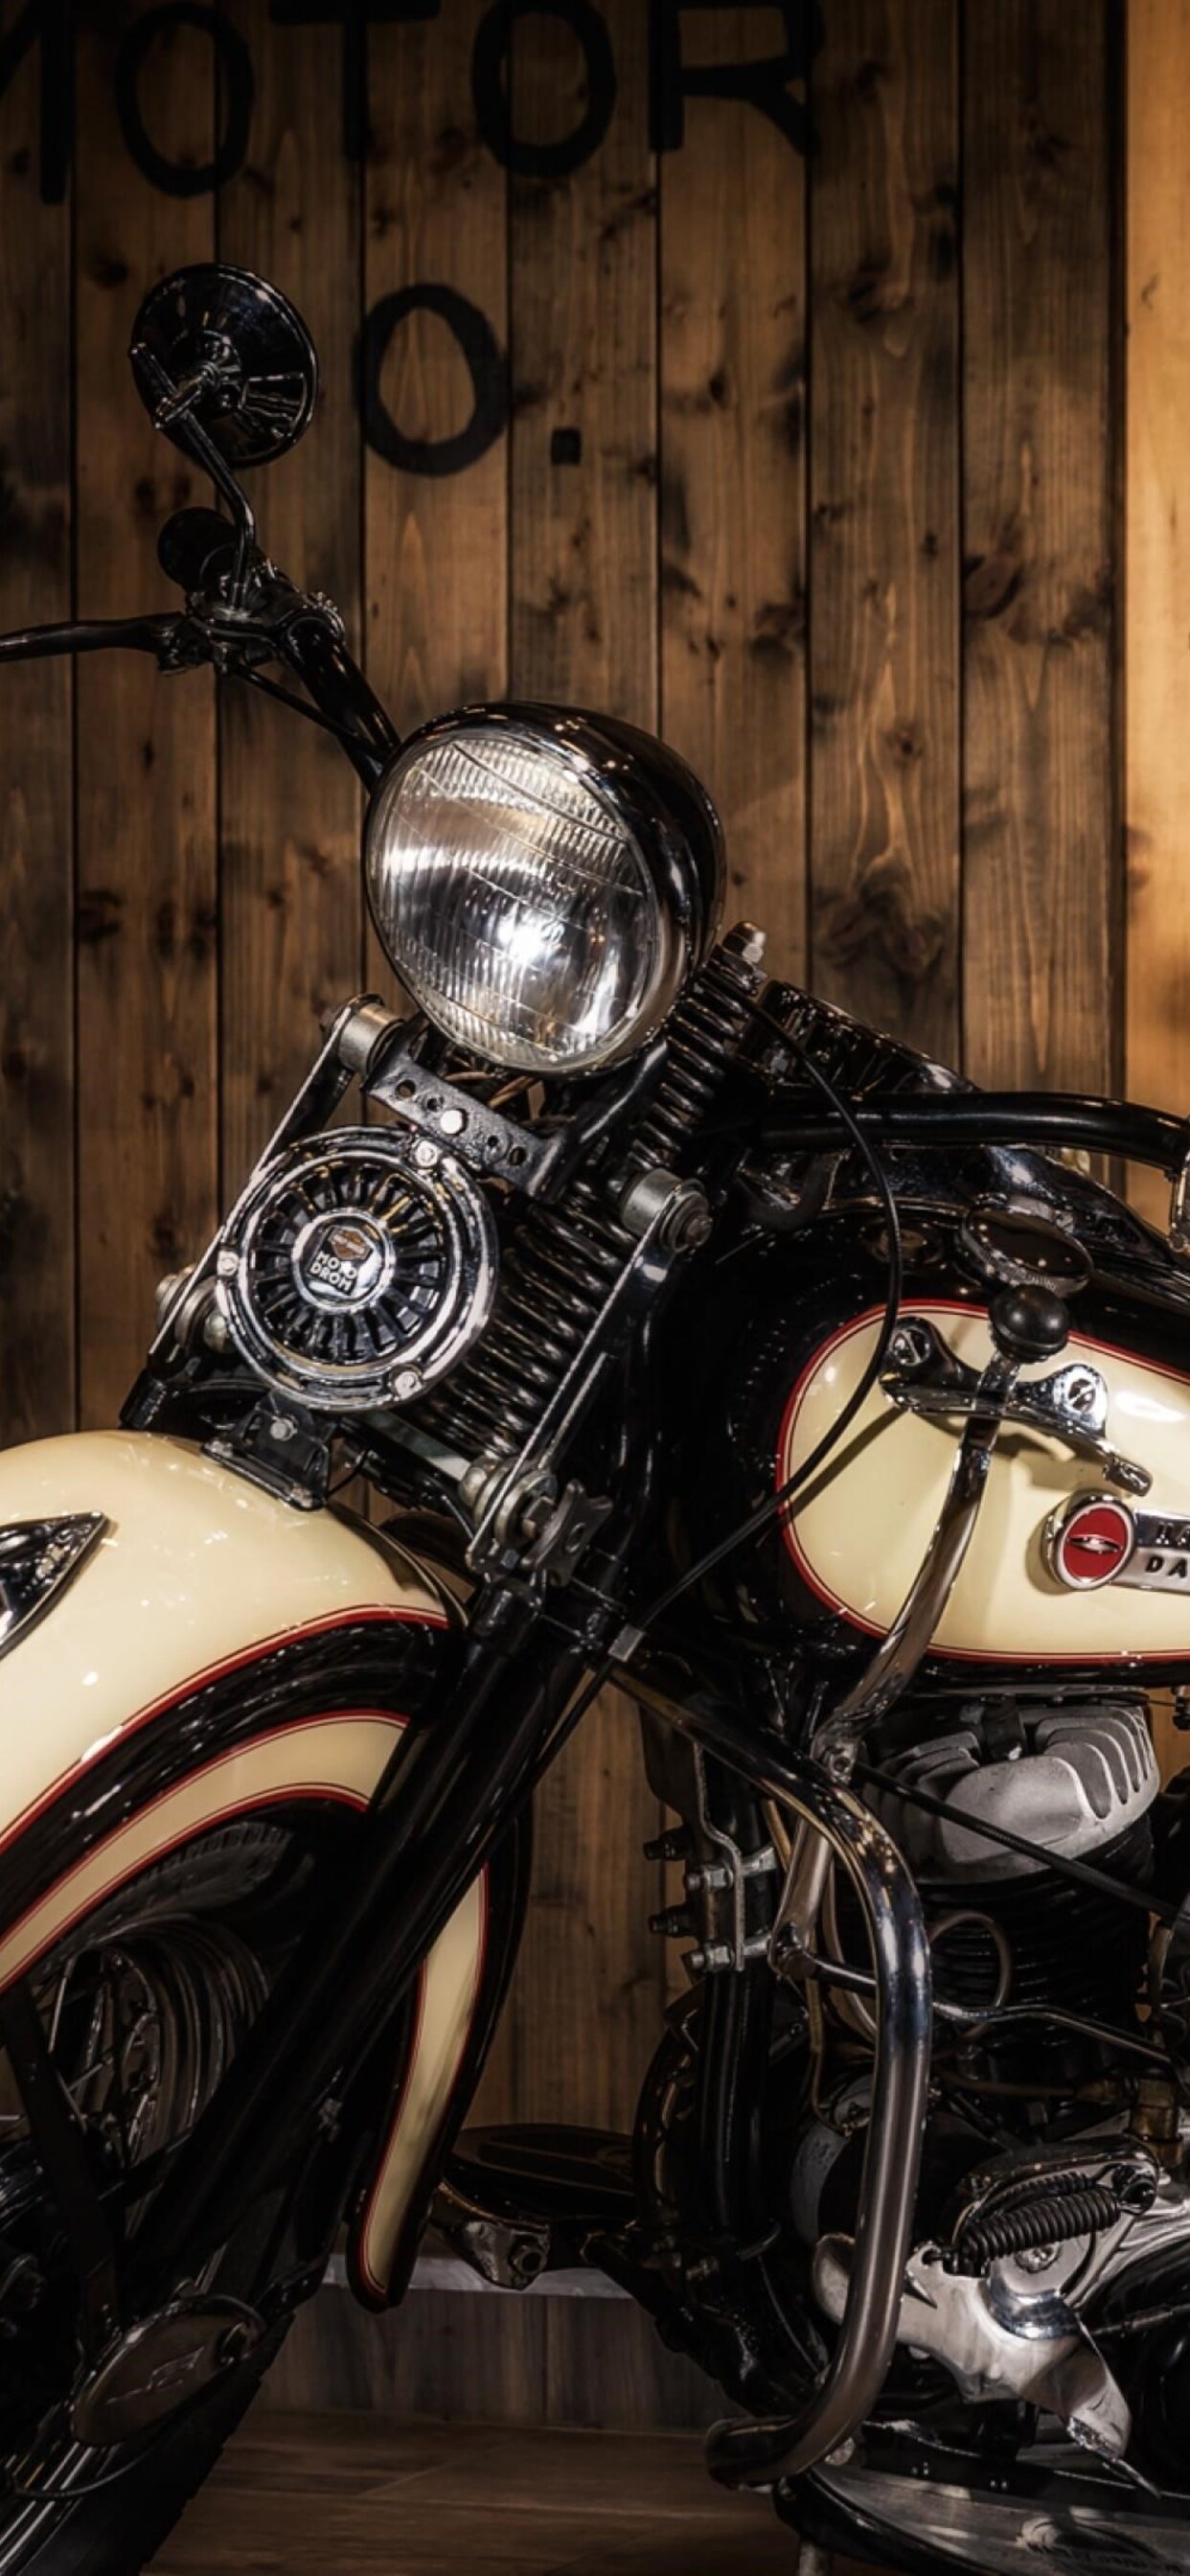 Harley-Davidson, HD wallpapers, Iconic motorcycles, Biker culture, 1250x2690 HD Handy